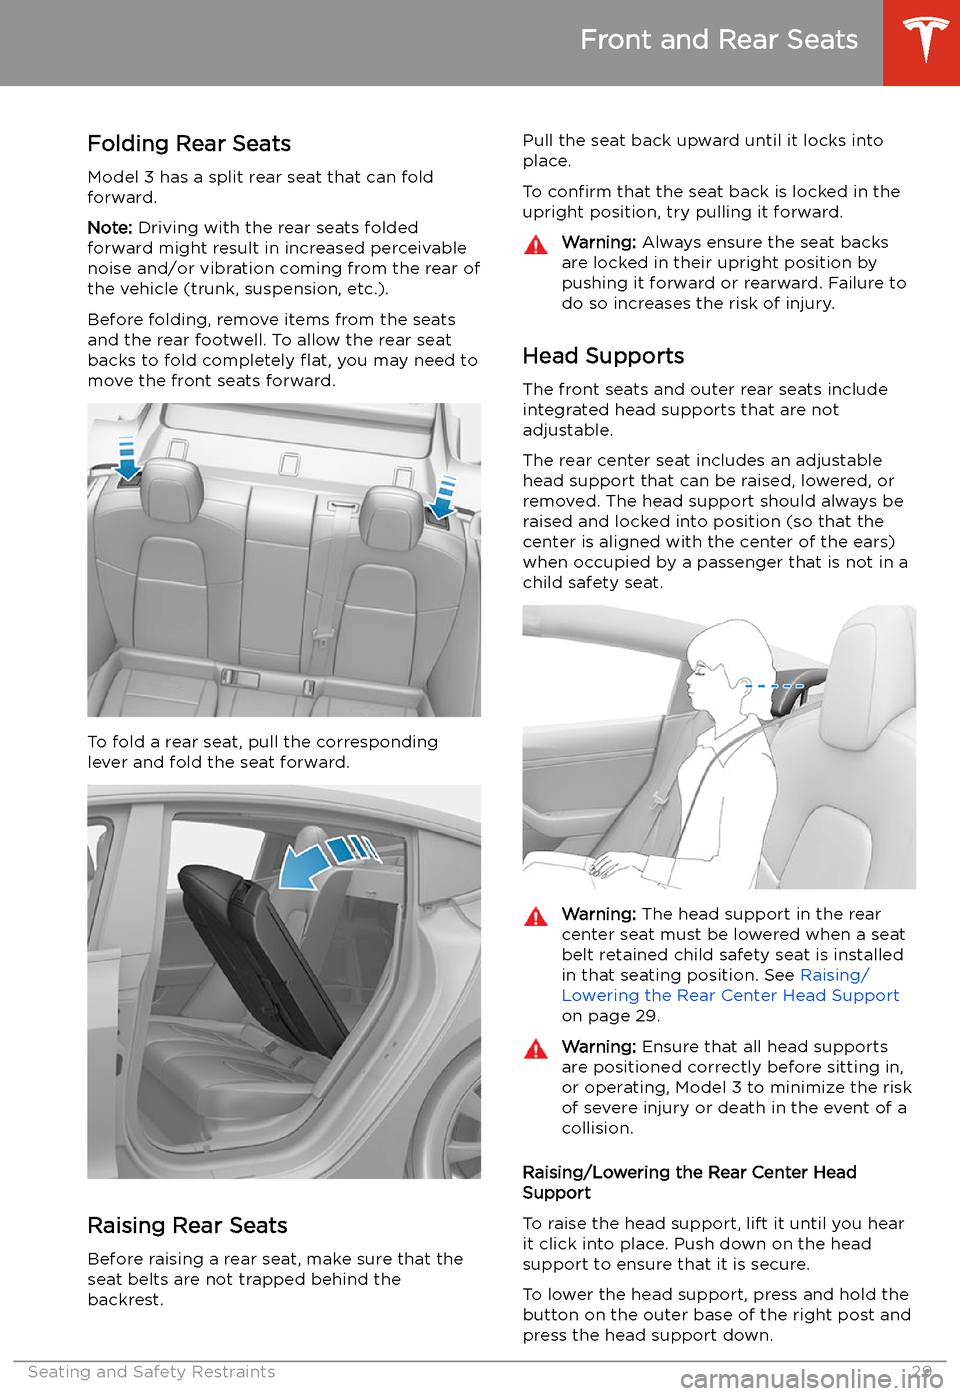 TESLA MODEL 3 2020  Owners Manuals Folding Rear Seats
Model 3 has a split rear seat that can fold
forward.
Note:  Driving with the rear seats folded
forward might result in increased perceivable
noise and/or vibration coming from the r